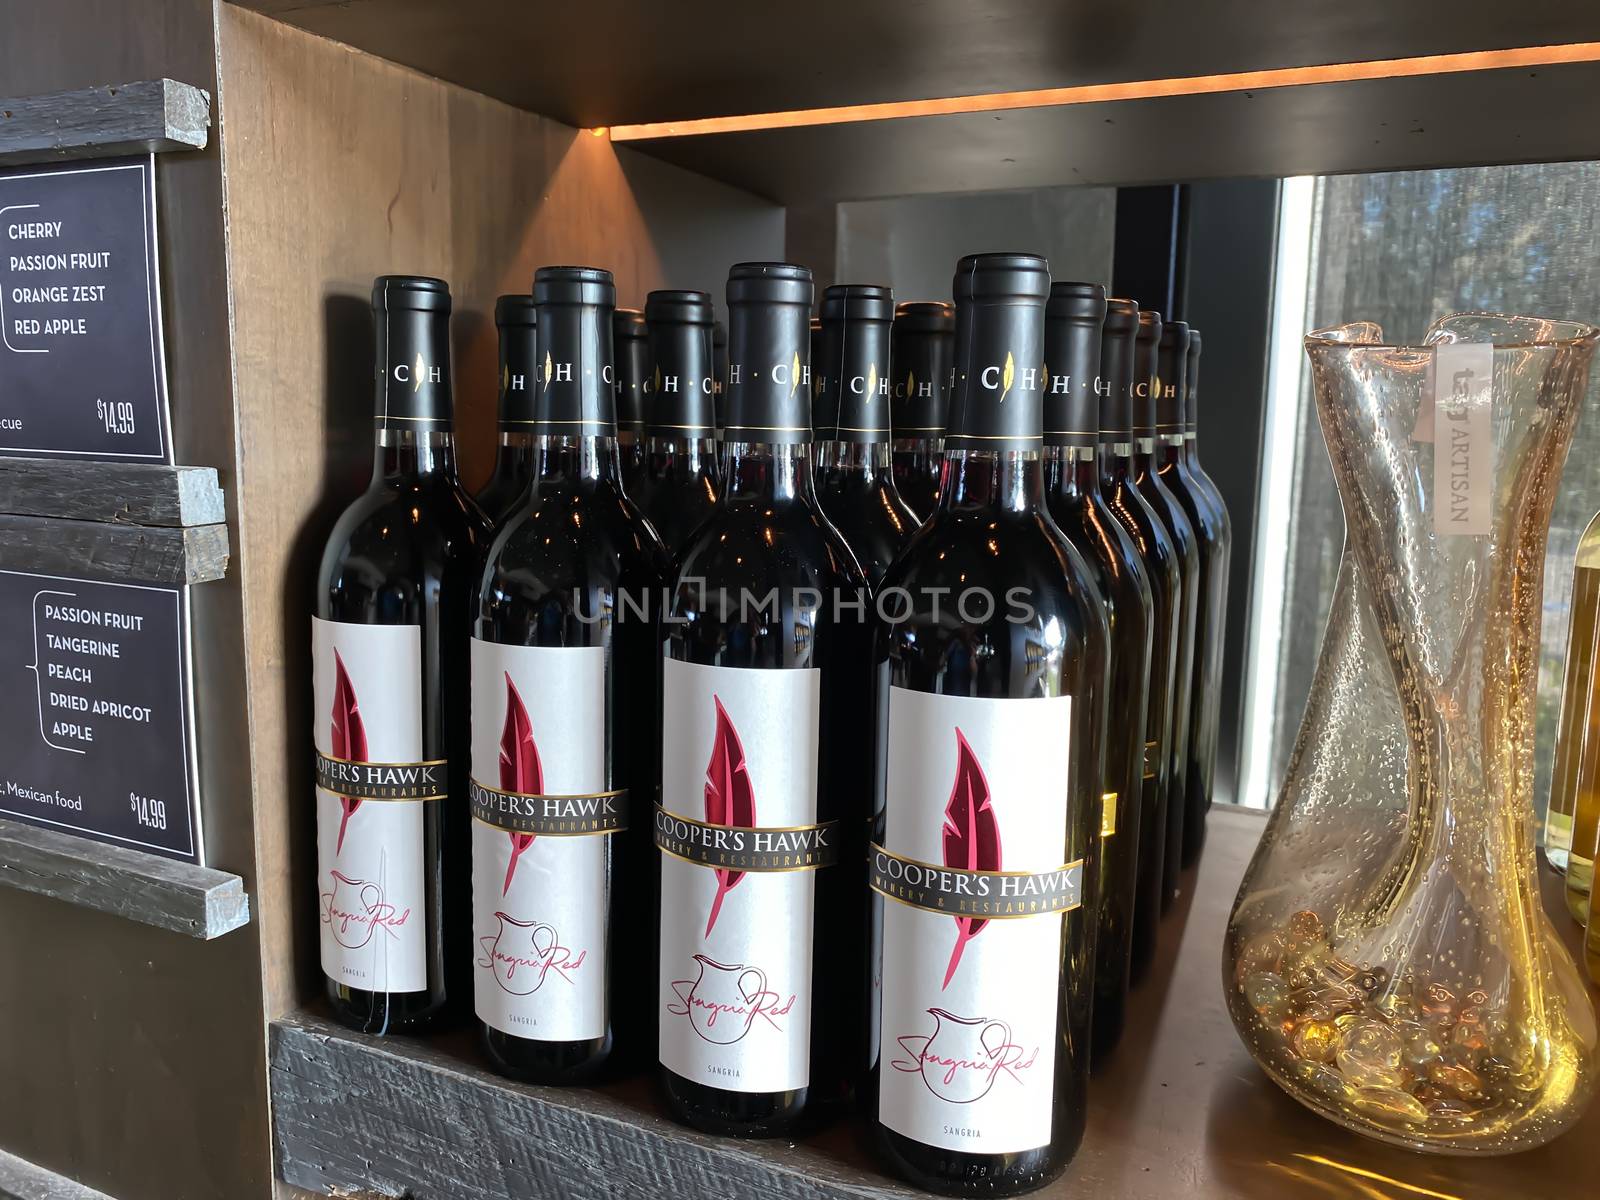 Naples, FL/USA - 10/30/20: Bottles of Sangria Red wine at a Coopers Hawk Wine bar and restaurant in Naples, Florida.